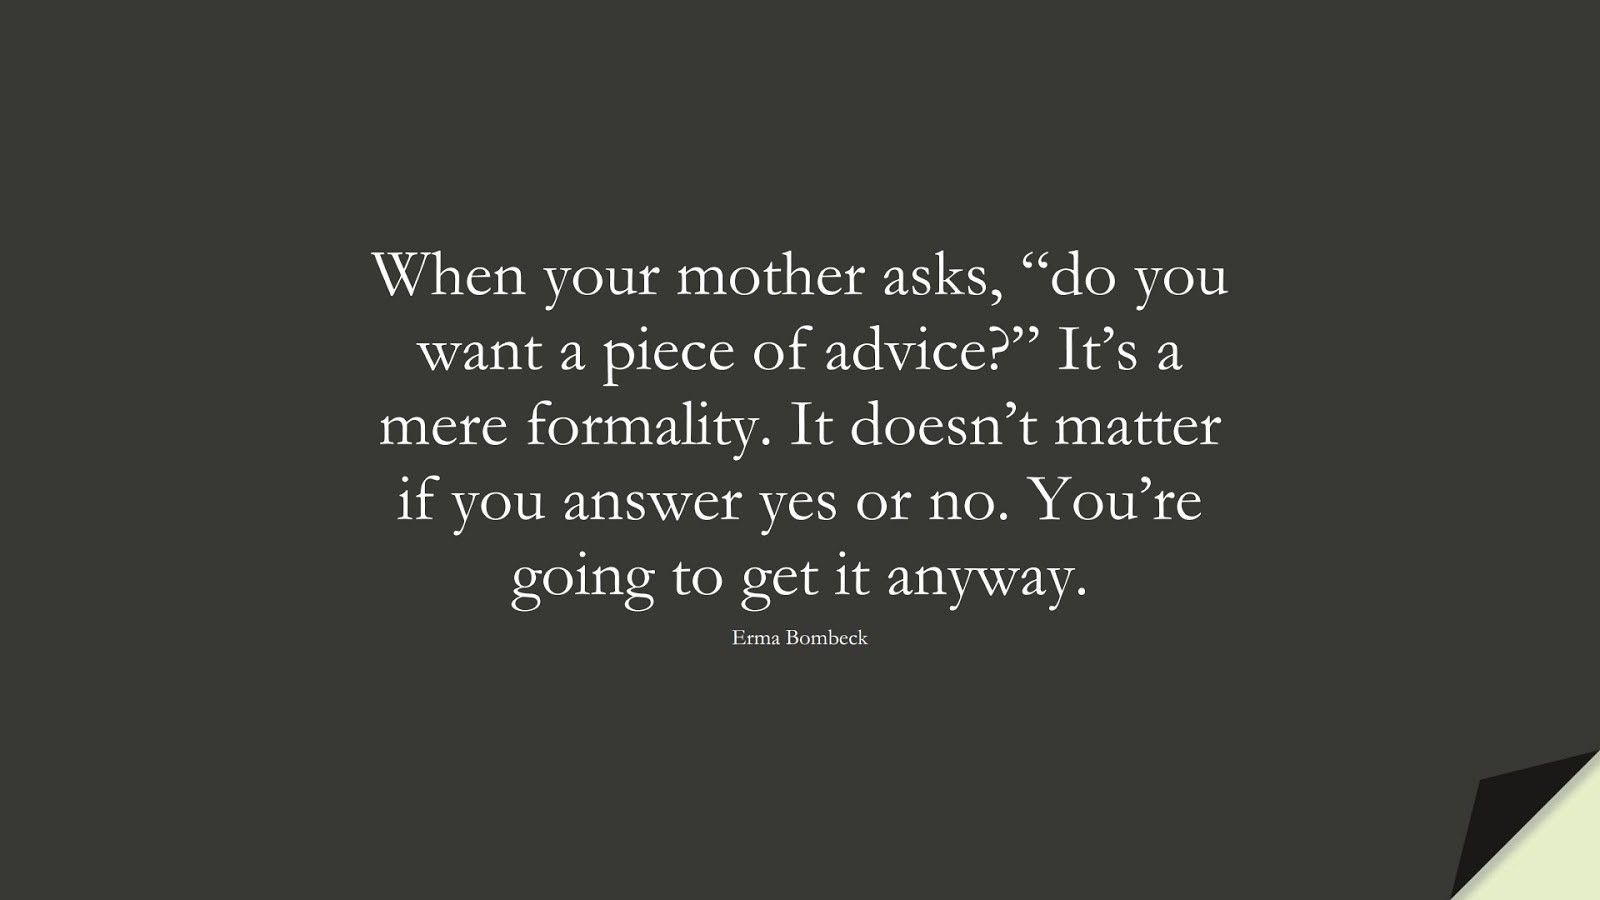 When your mother asks, “do you want a piece of advice?” It’s a mere formality. It doesn’t matter if you answer yes or no. You’re going to get it anyway. (Erma Bombeck);  #FamilyQuotes